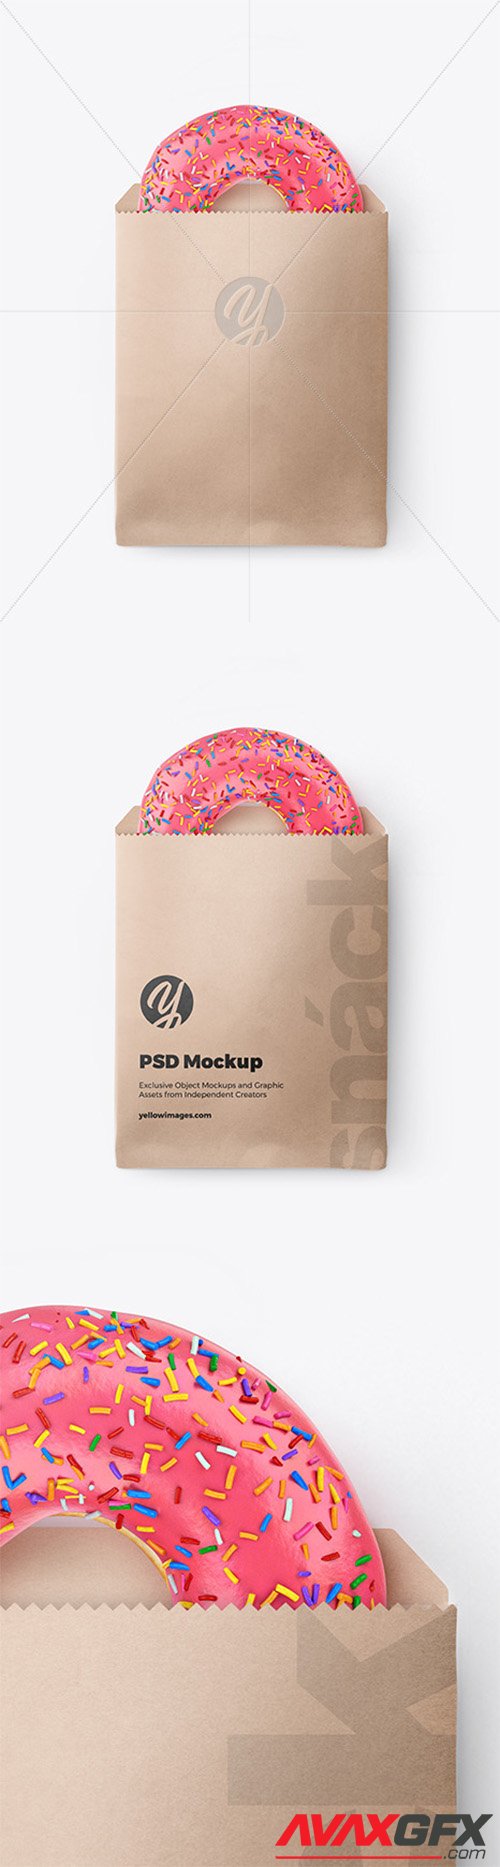 Paper Pack with Pink Glazed Donut 65191